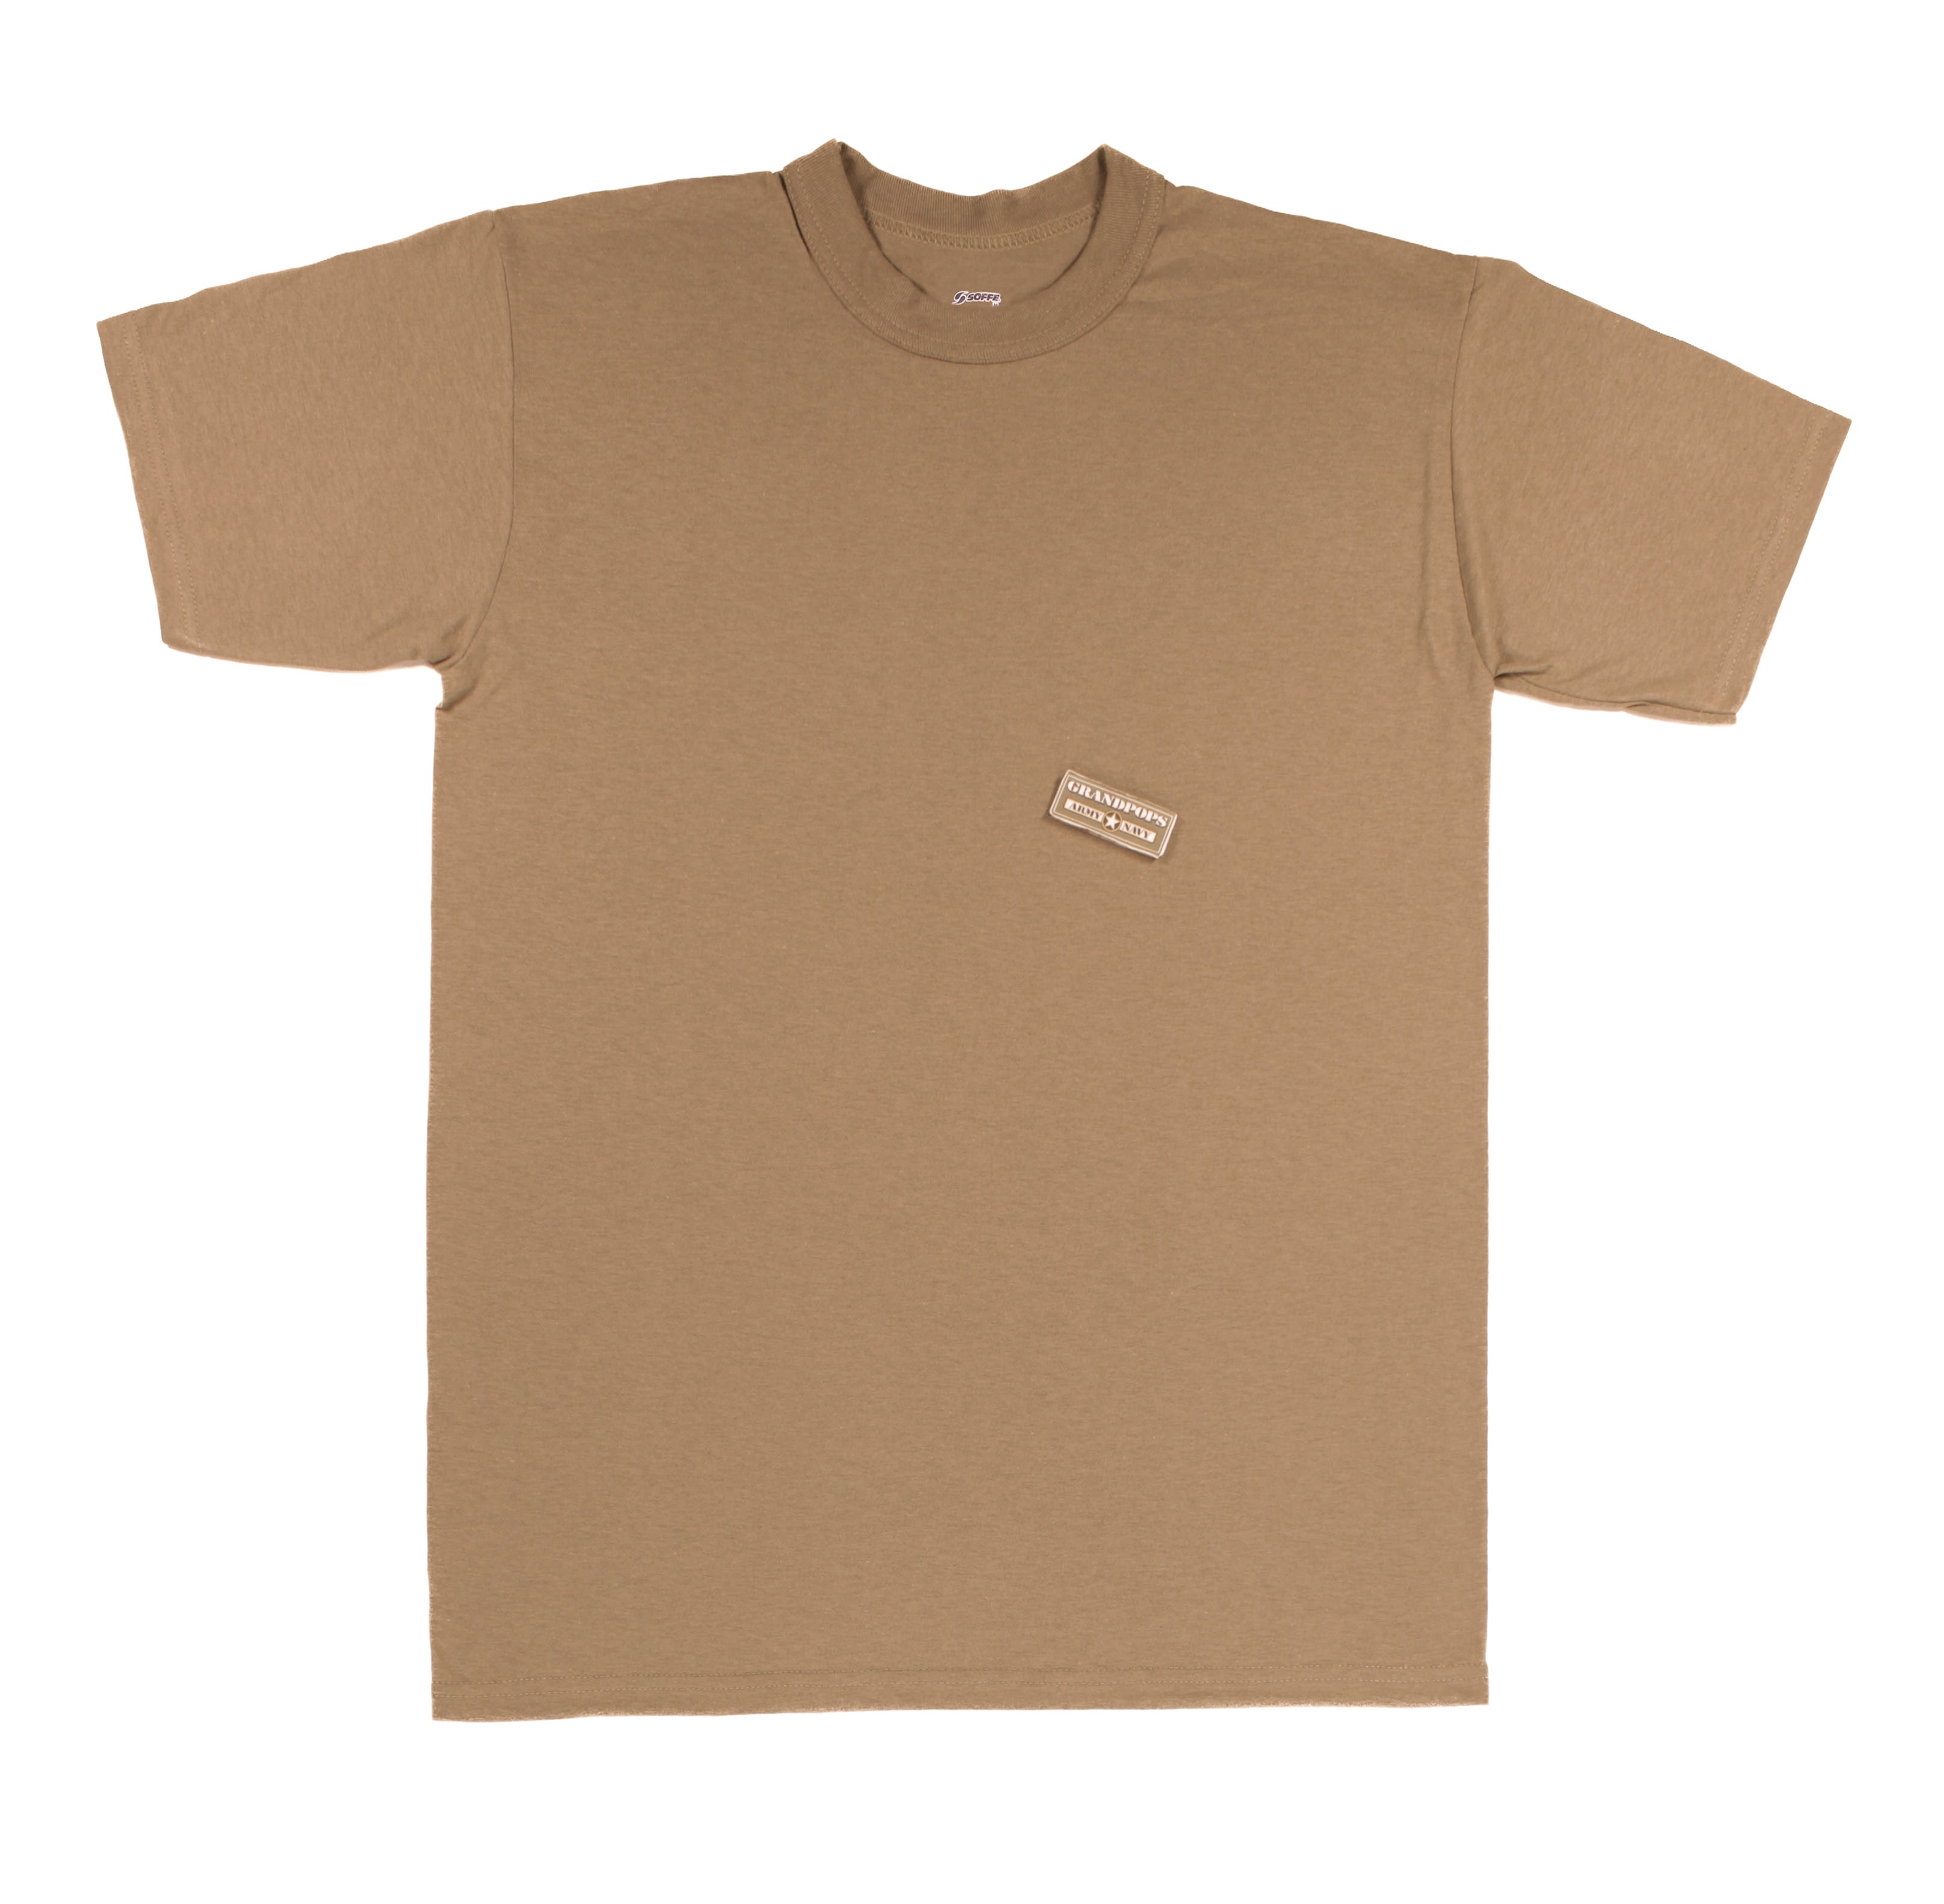 Soffe M305 Adult Midweight Cotton Tee - NWU Type III Coyote Brown - XL